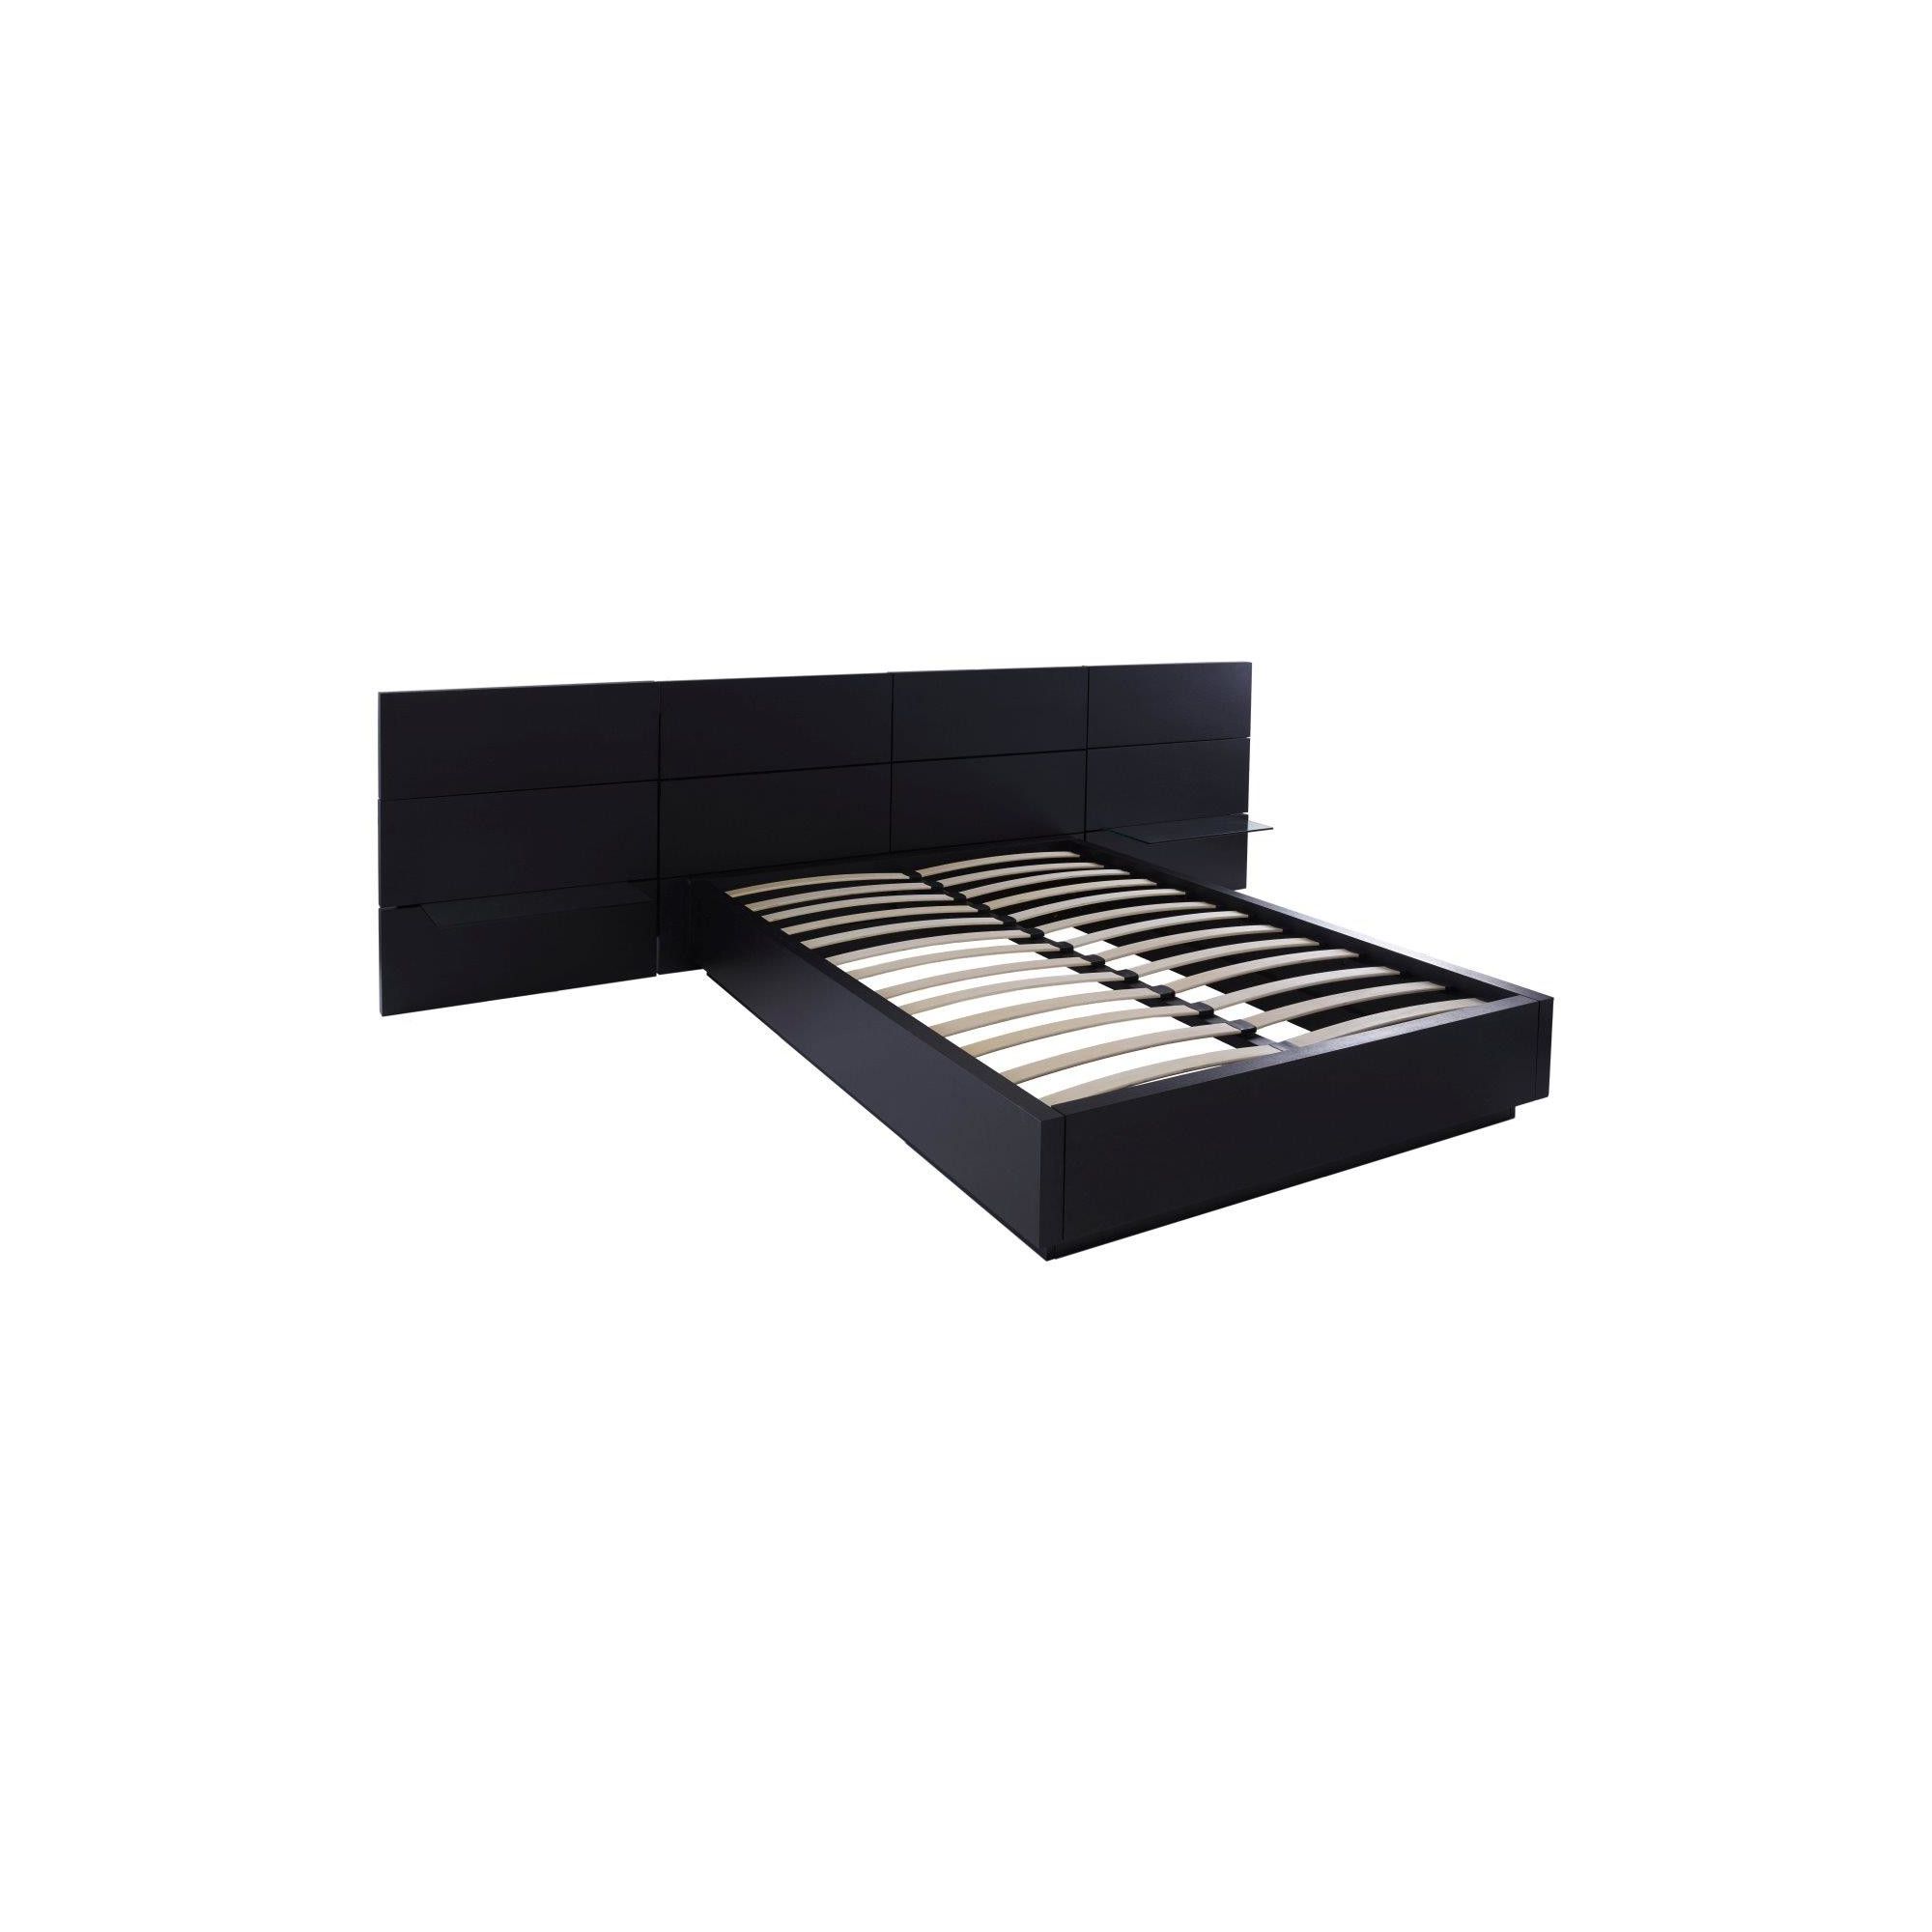 Gillmore Space Cordoba Bed with Side Units - Double at Tesco Direct